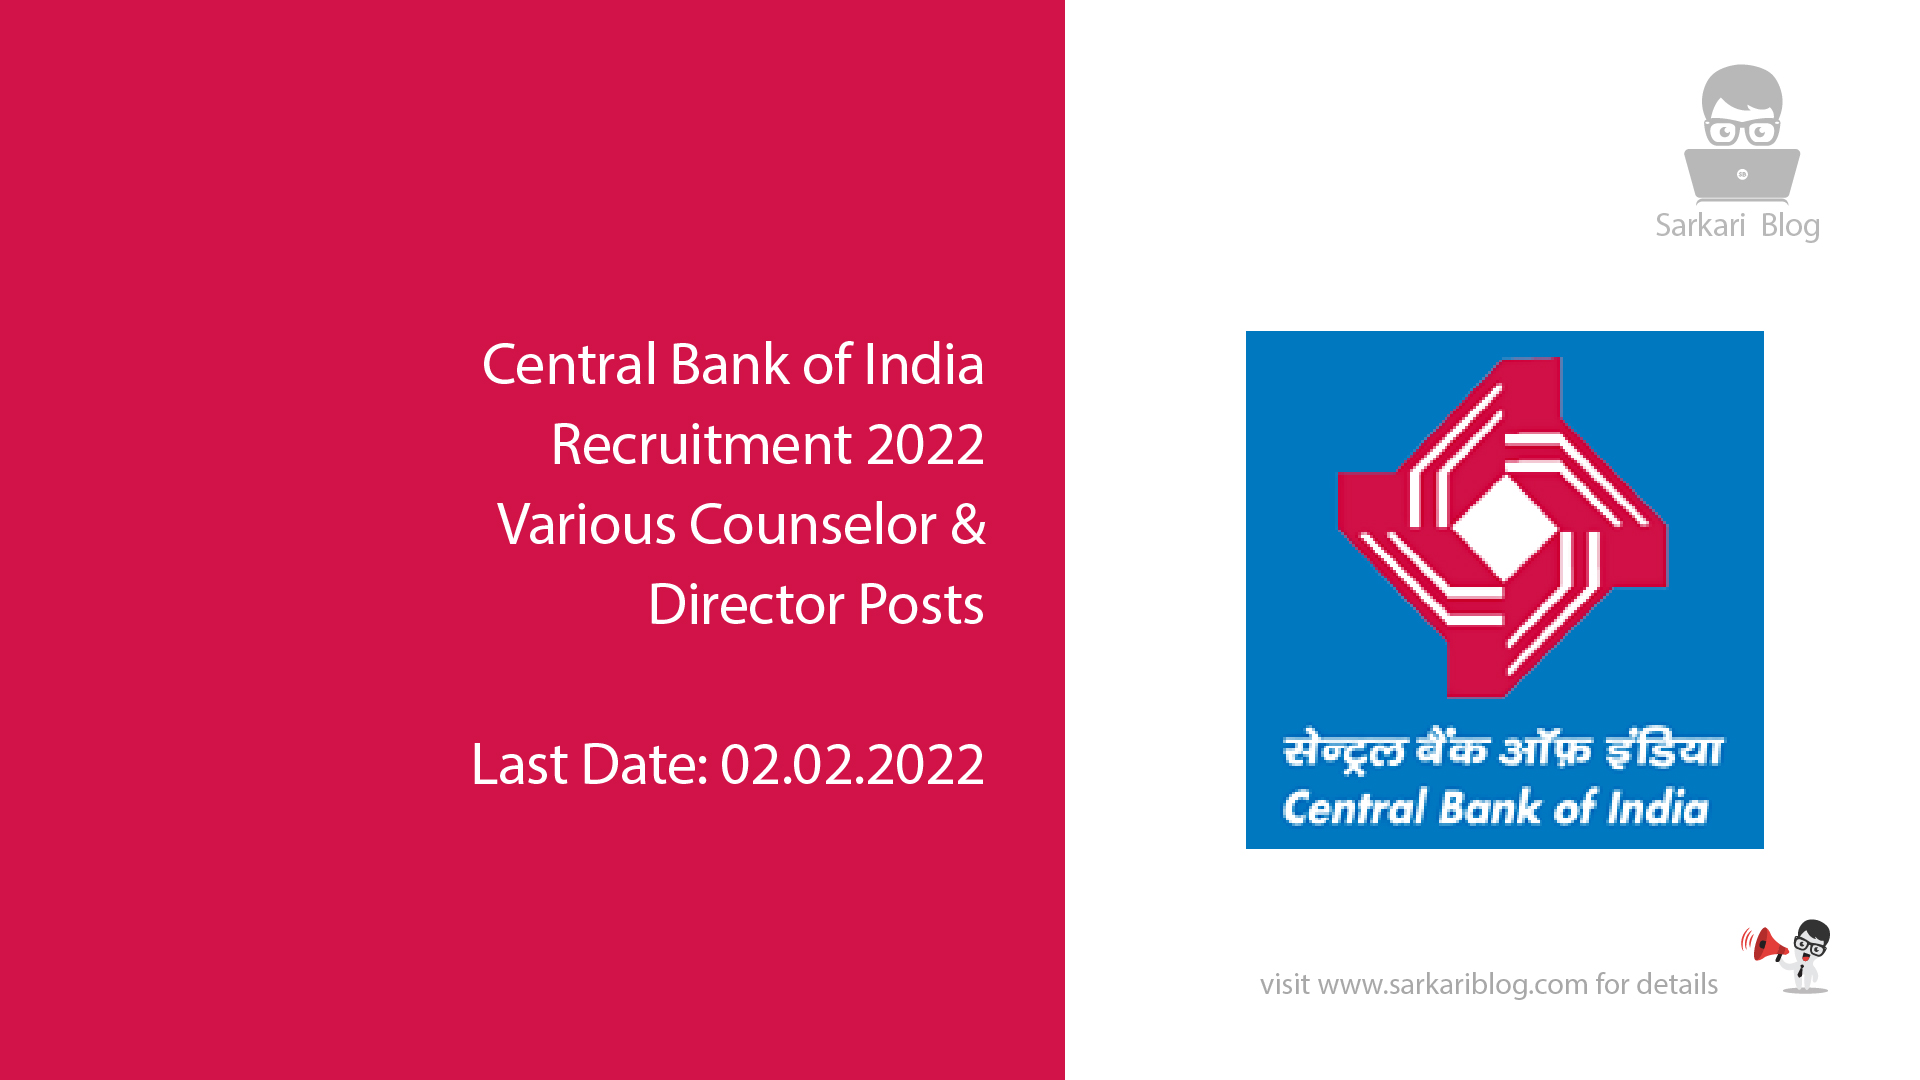 Central Bank of India Recruitment 2022